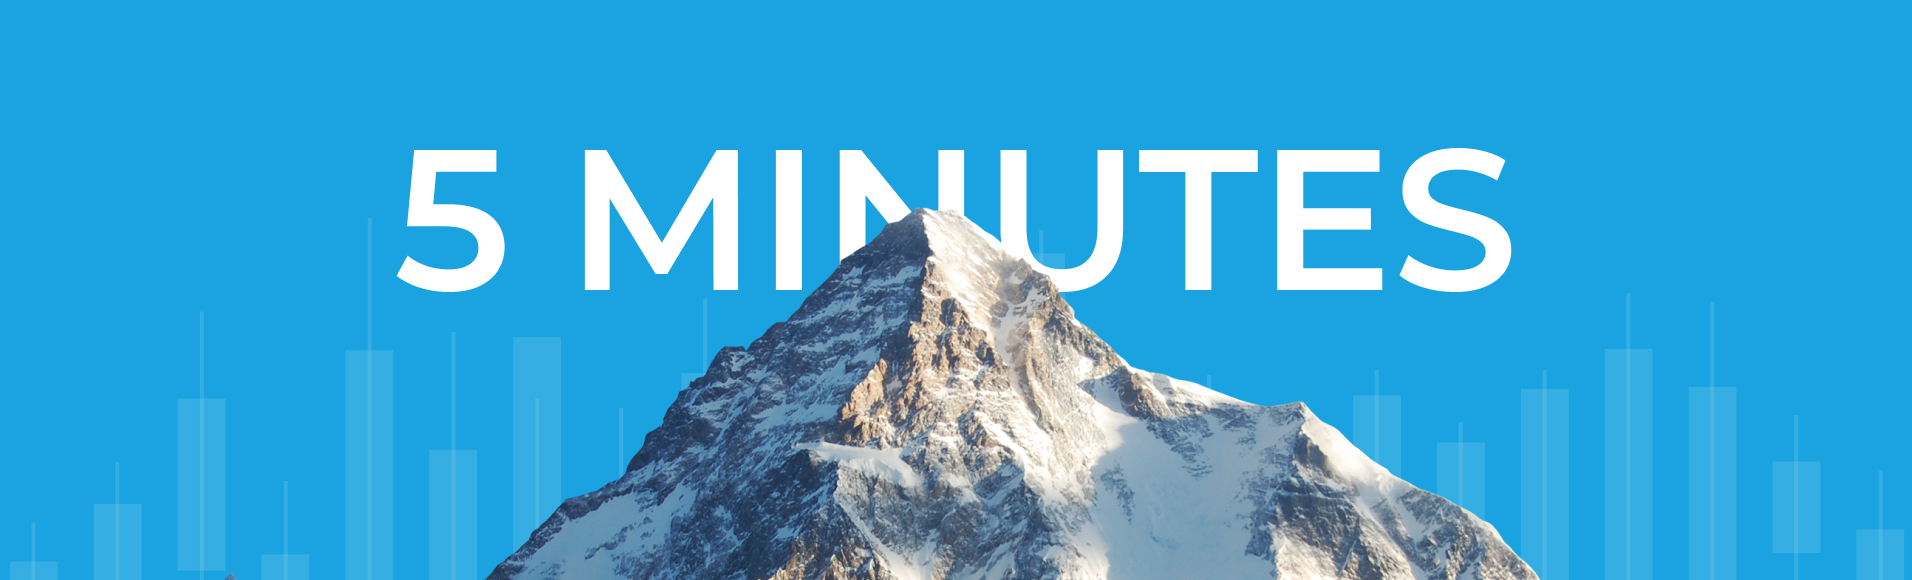 5 minutes options with Everest strategy